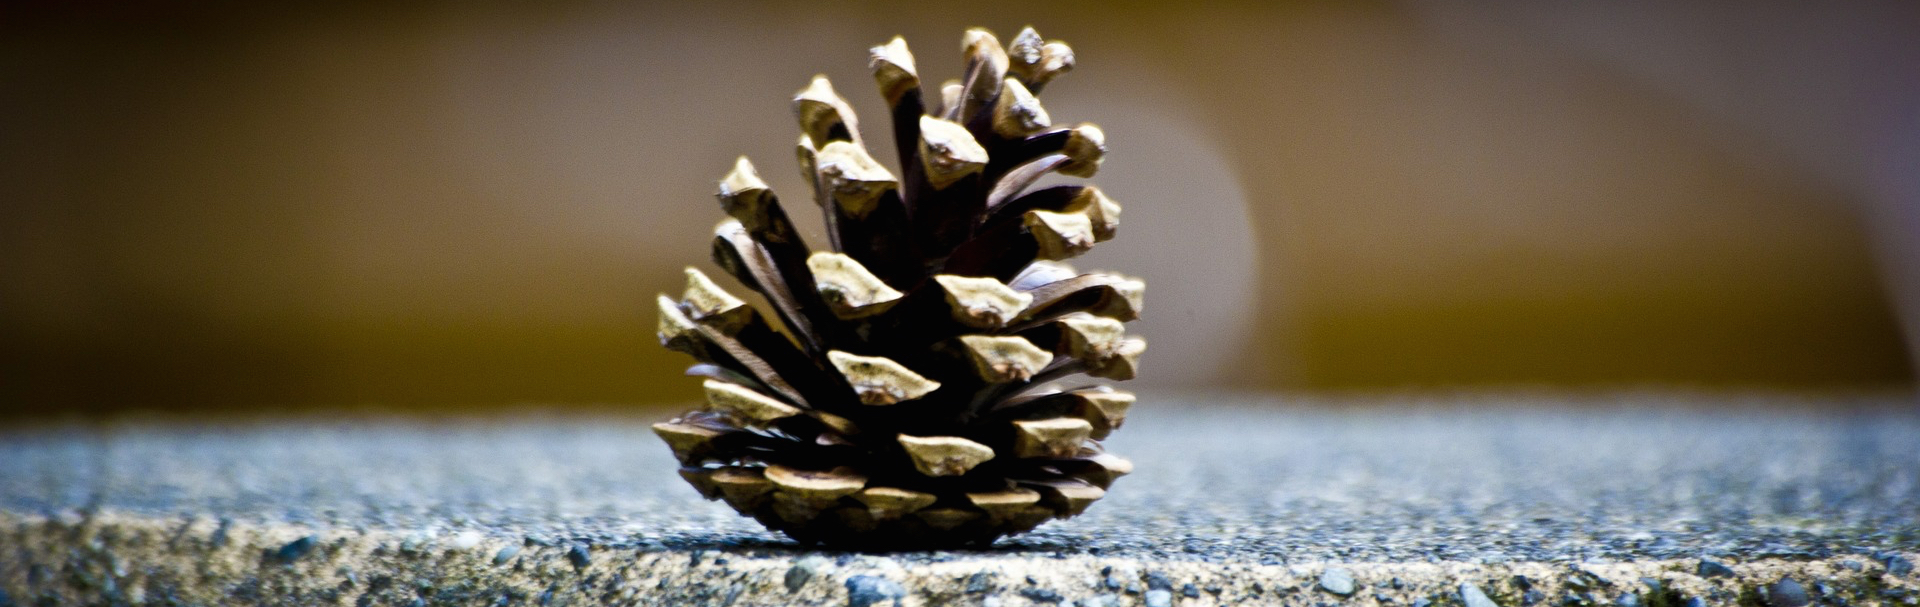 Pinecones have natural heating and cooling mechanisms.